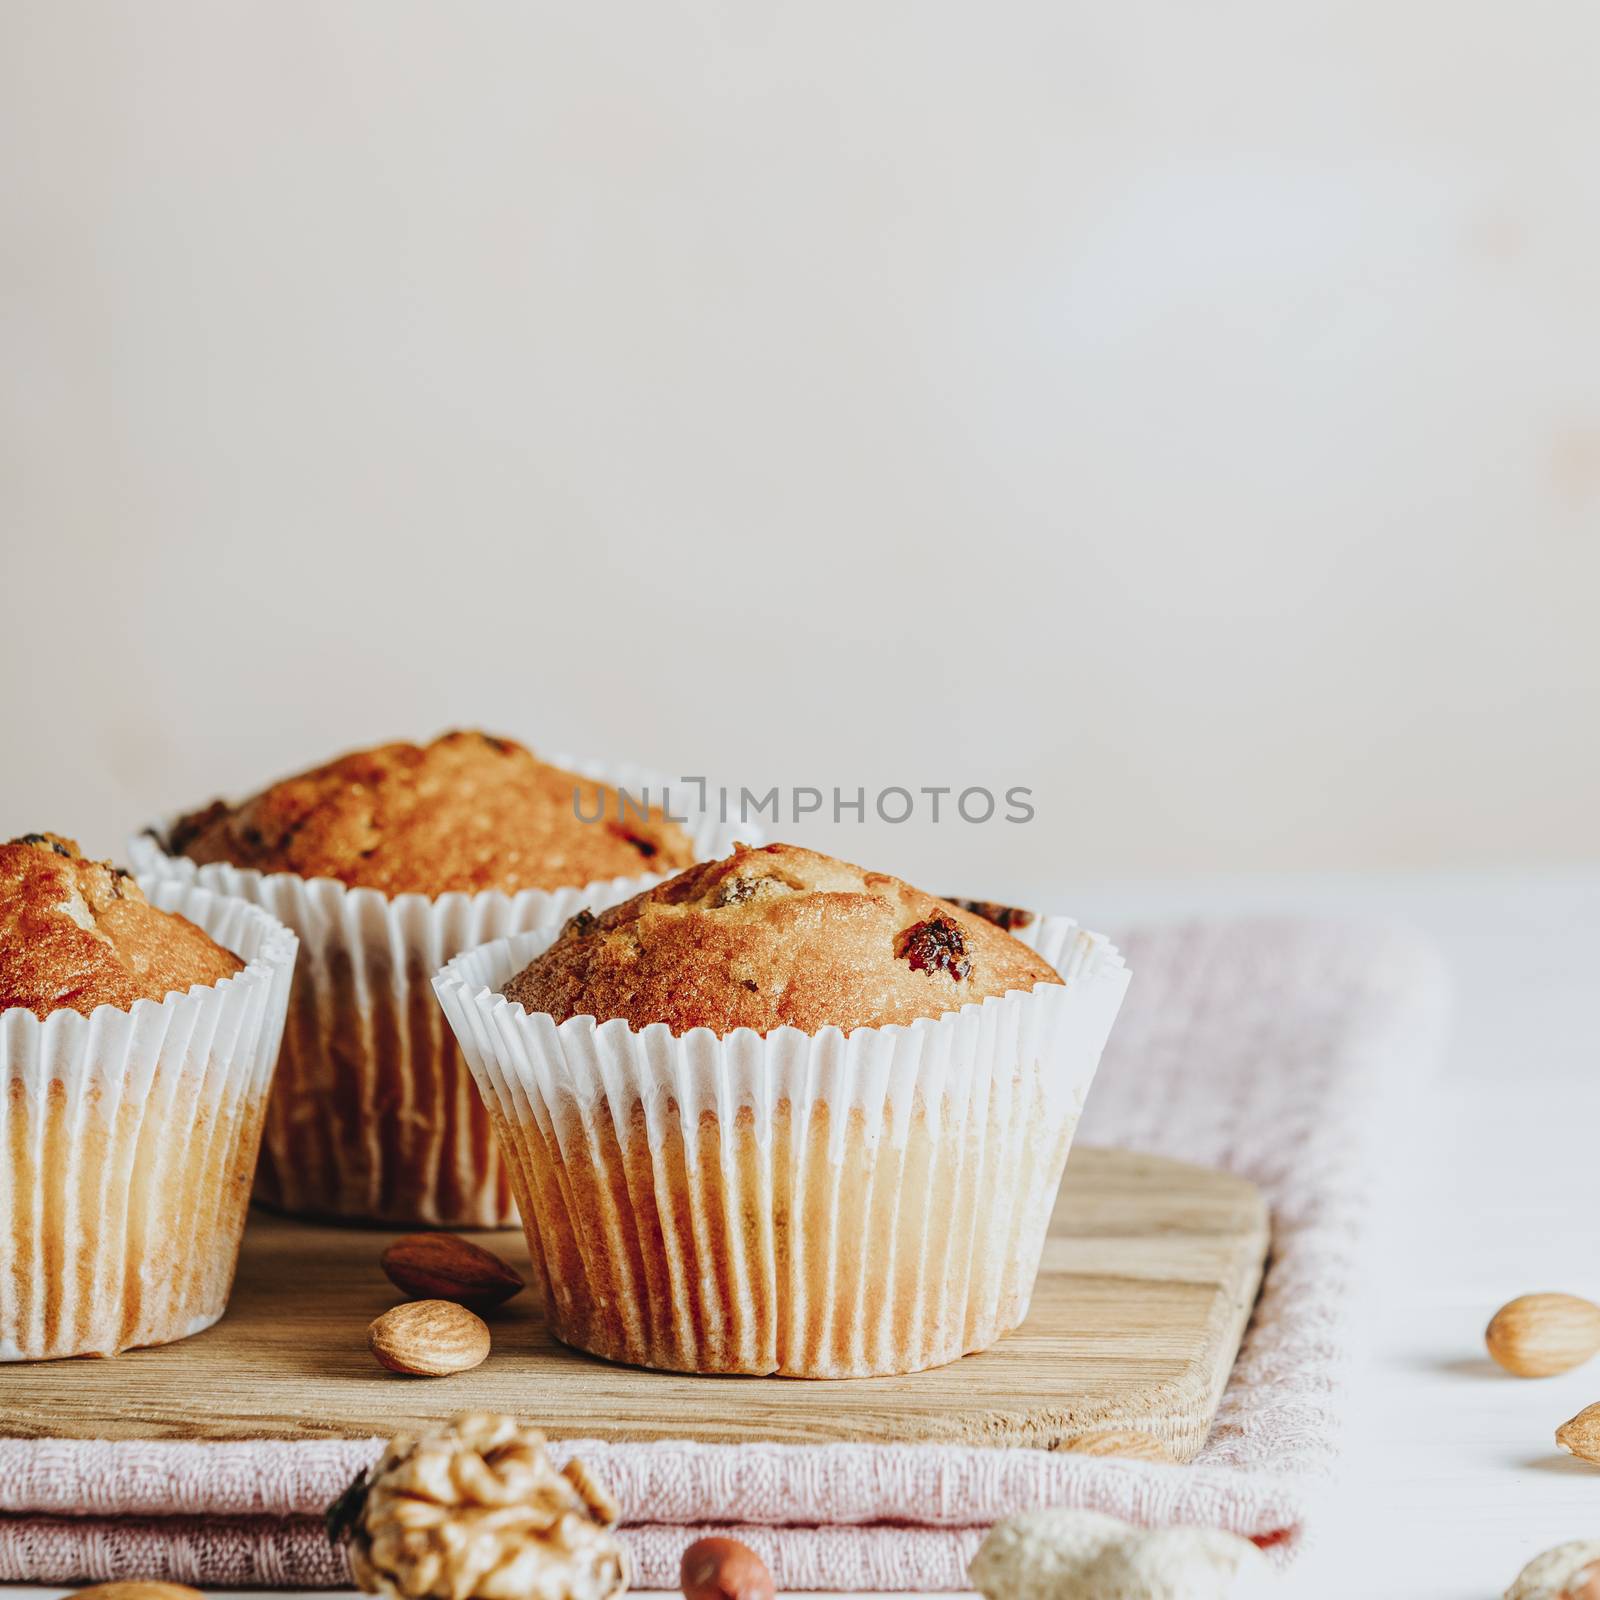 Vanilla caramel muffins in paper cups on white wooden background. Delicious cupcake with raisins, almonds and nuts. Homemade biscuit cakes. Copy space for text.